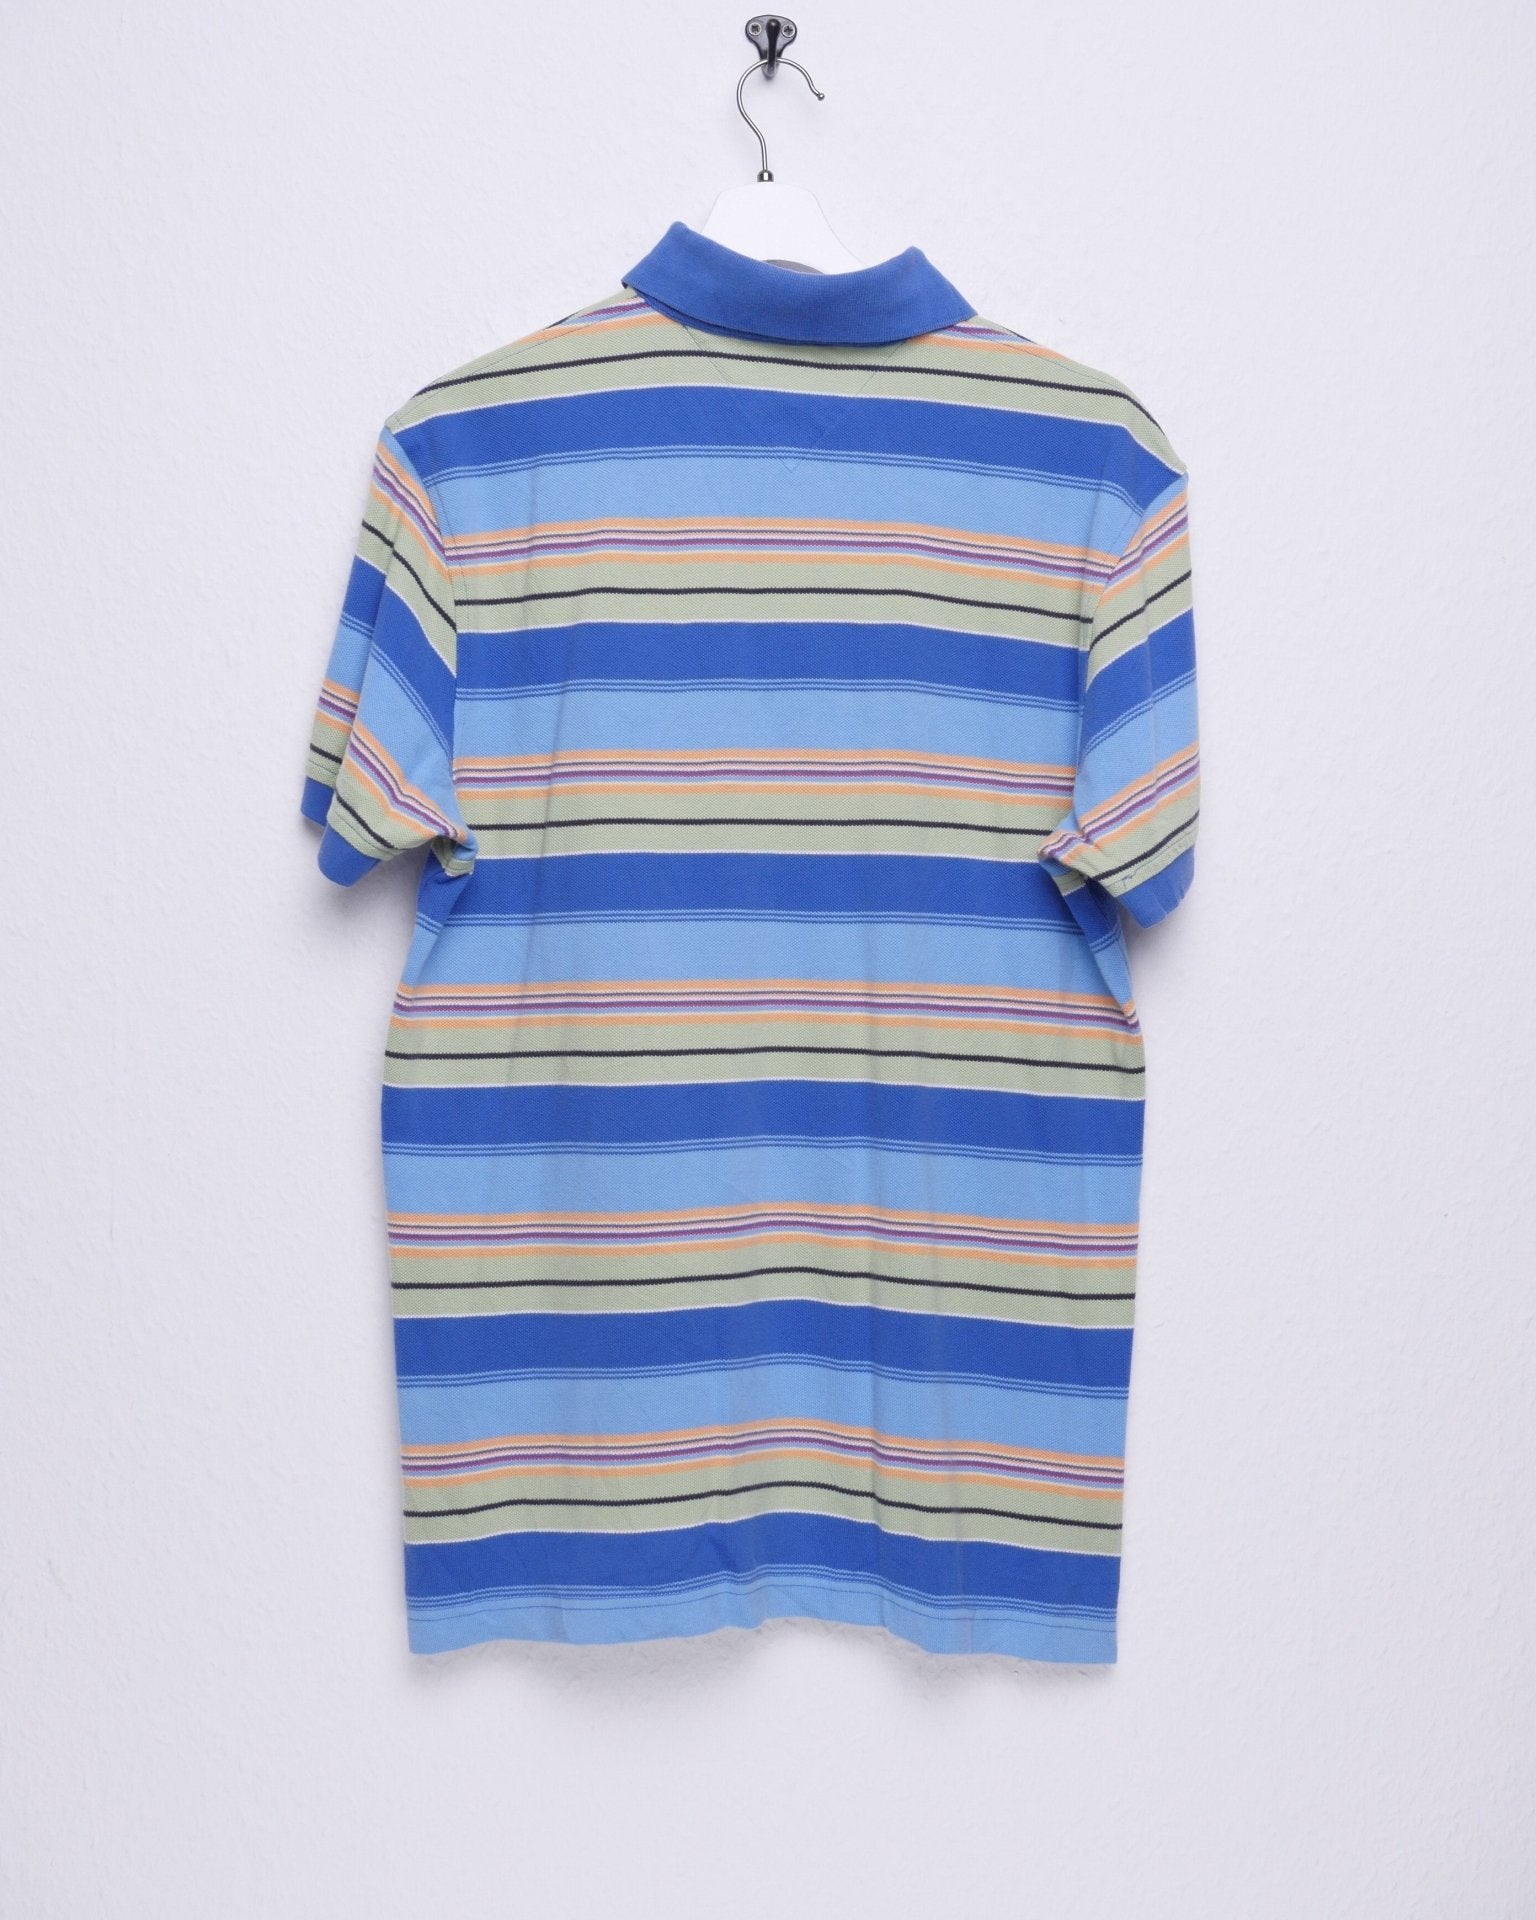 tommy embroidered Logo striped Polo Shirt - Peeces